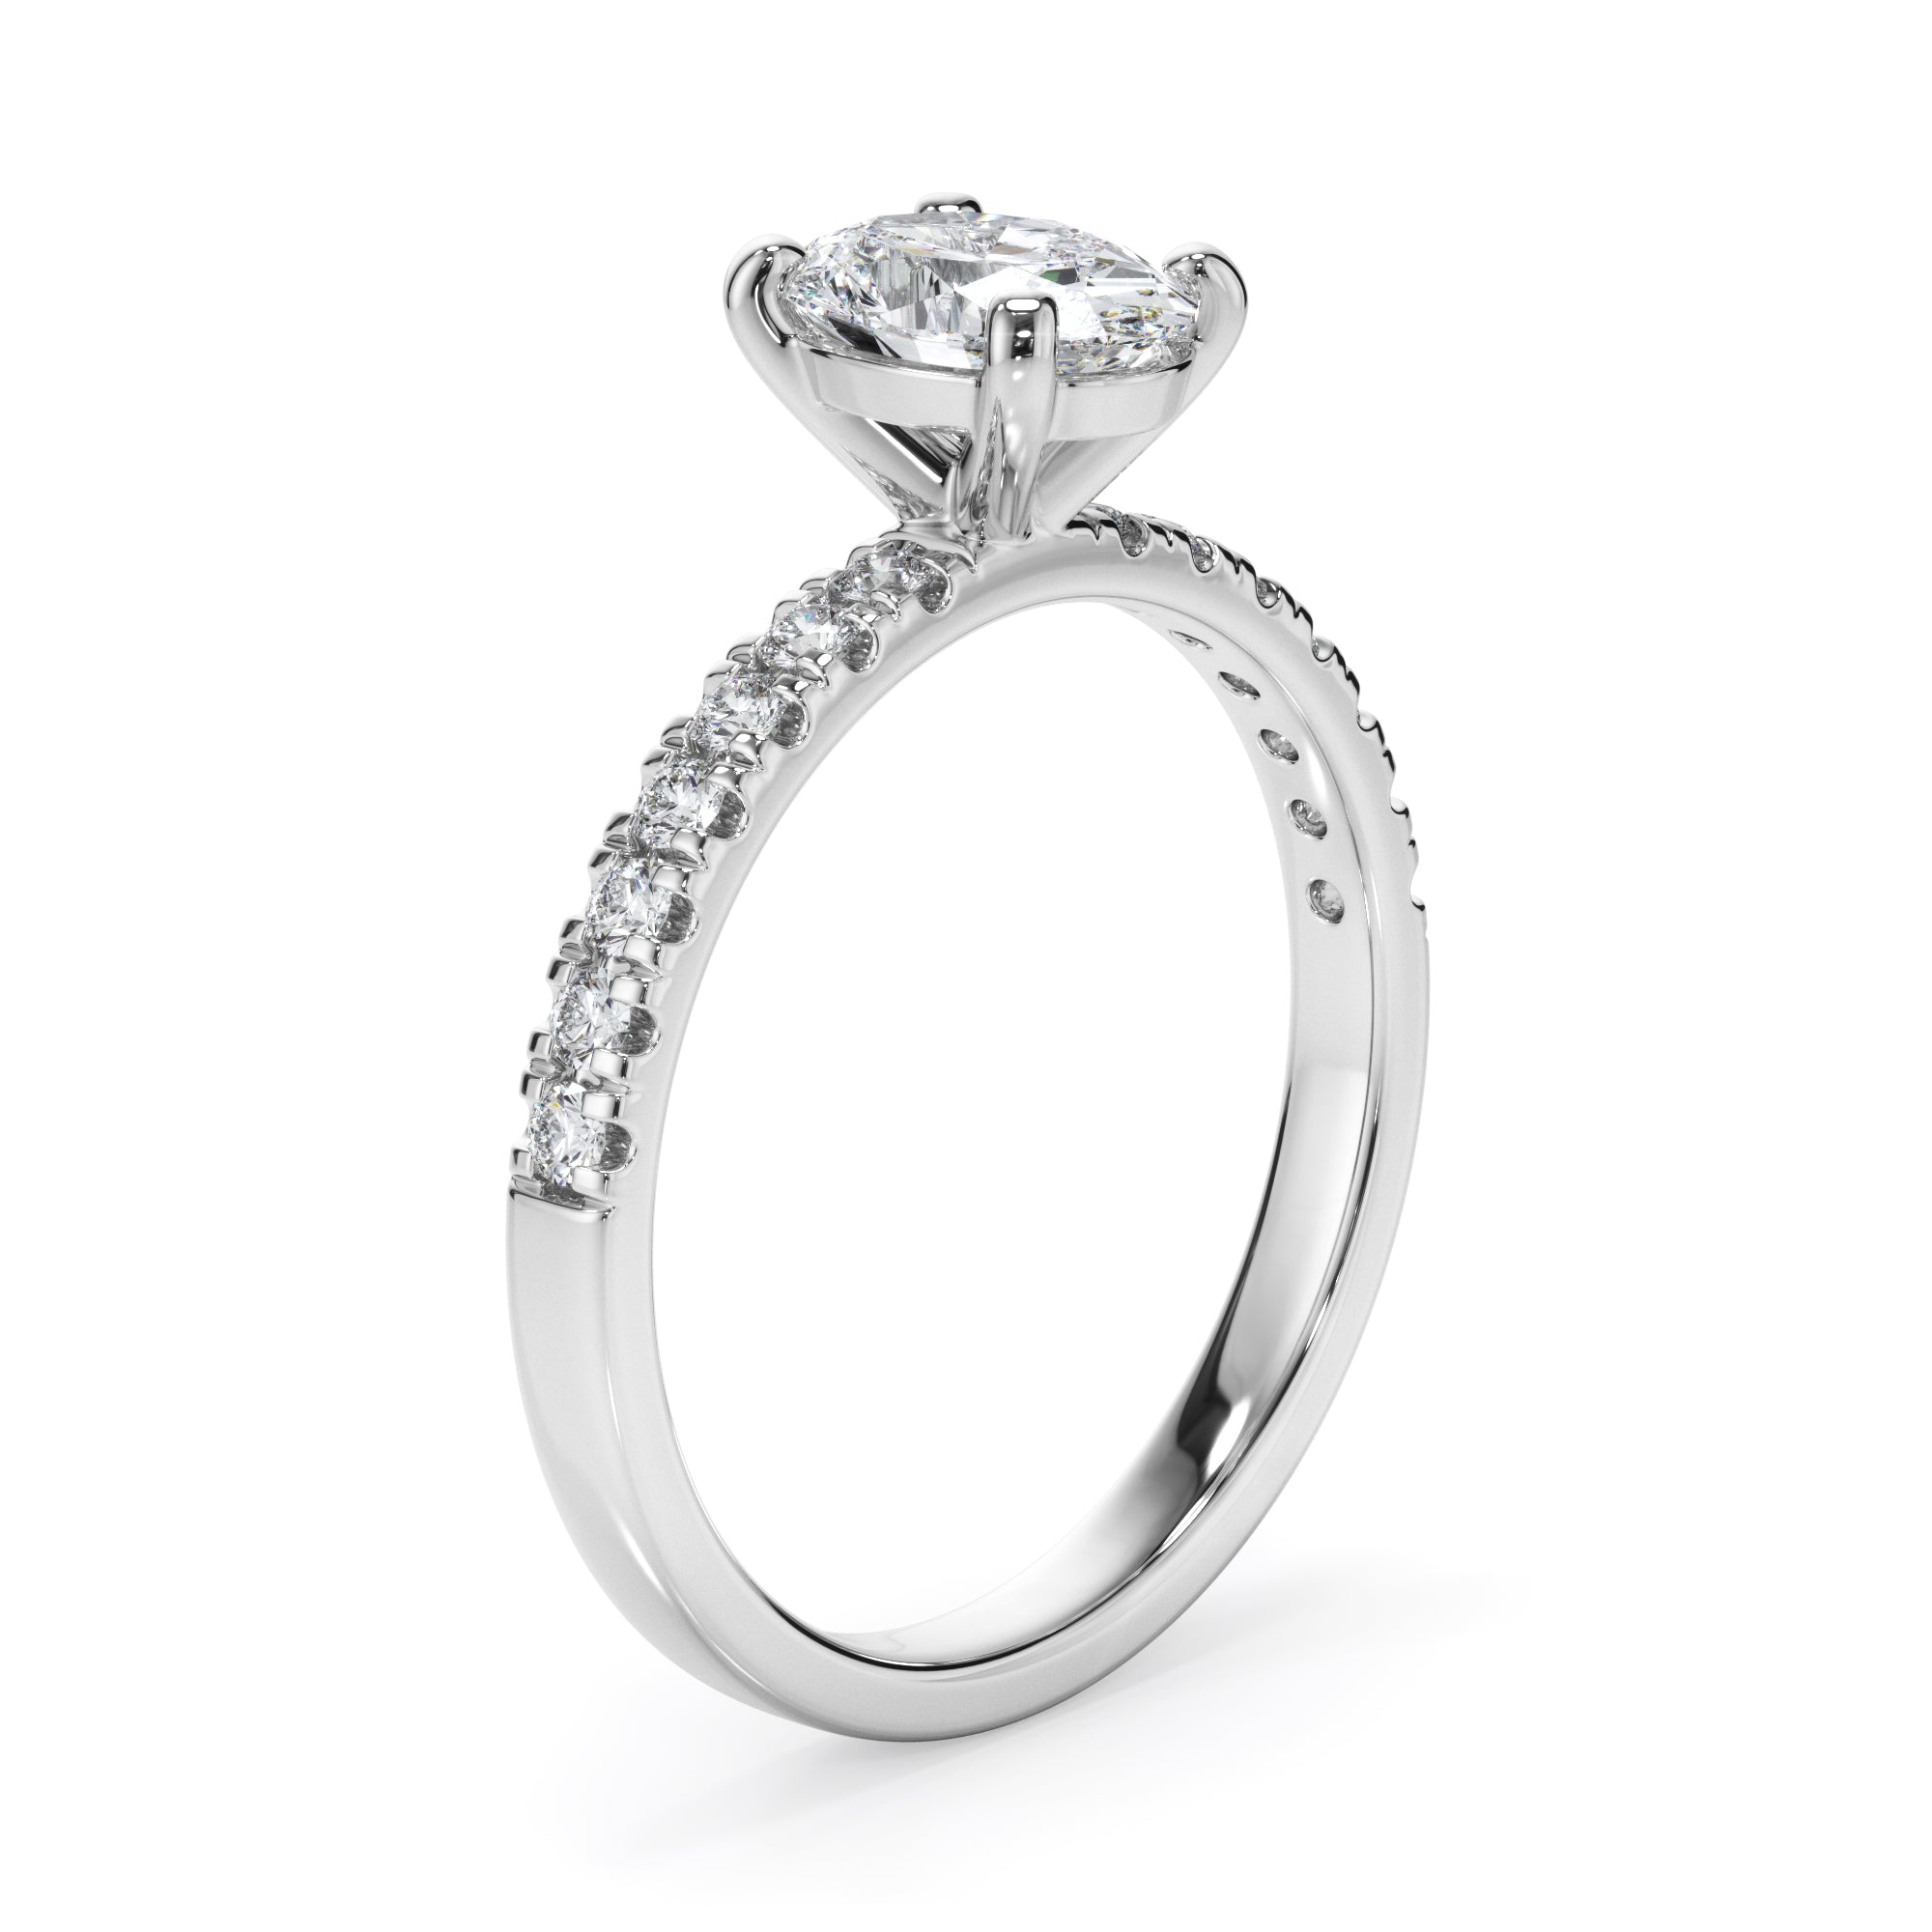 18ct White Gold Oval Cut Diamond Engagement Ring with Shoulder Stone